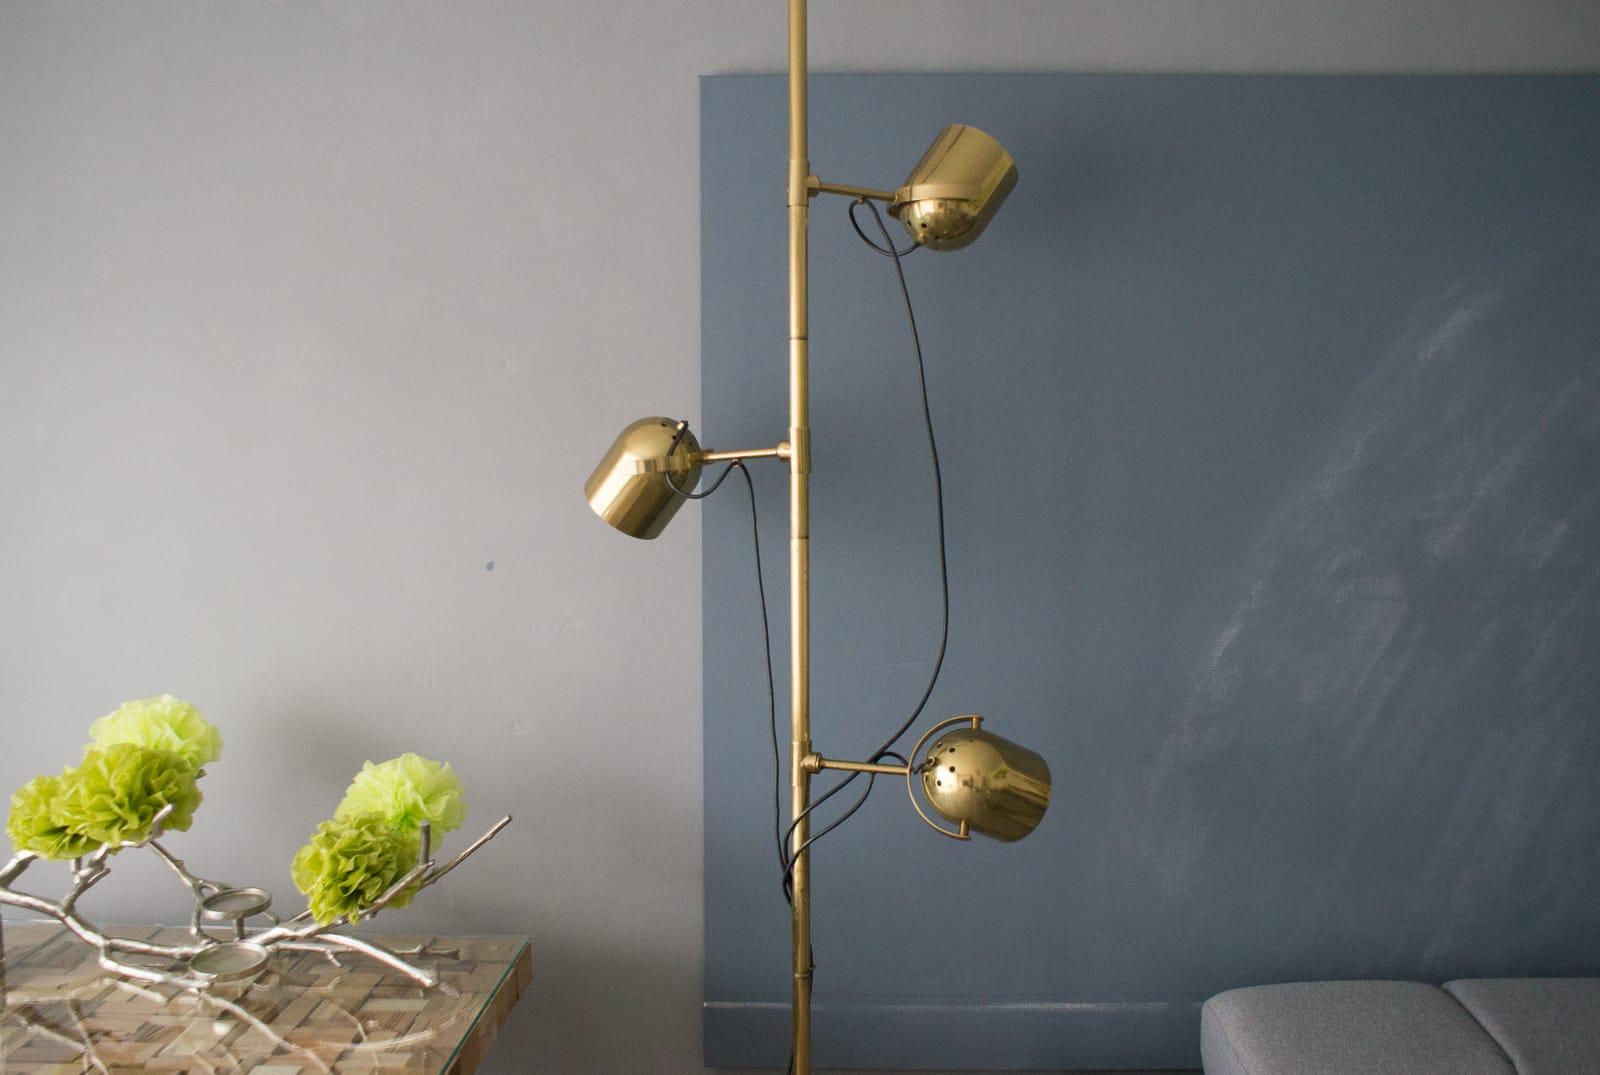 Extremely rare and high quality brass lamp, Model S 100, 1970s-1980s. 

The lamp has a beautiful patina and a few traces of use, everything in the ready to live condition.

Ceiling height must be between 247cm-259cm.

We wrote with Florian